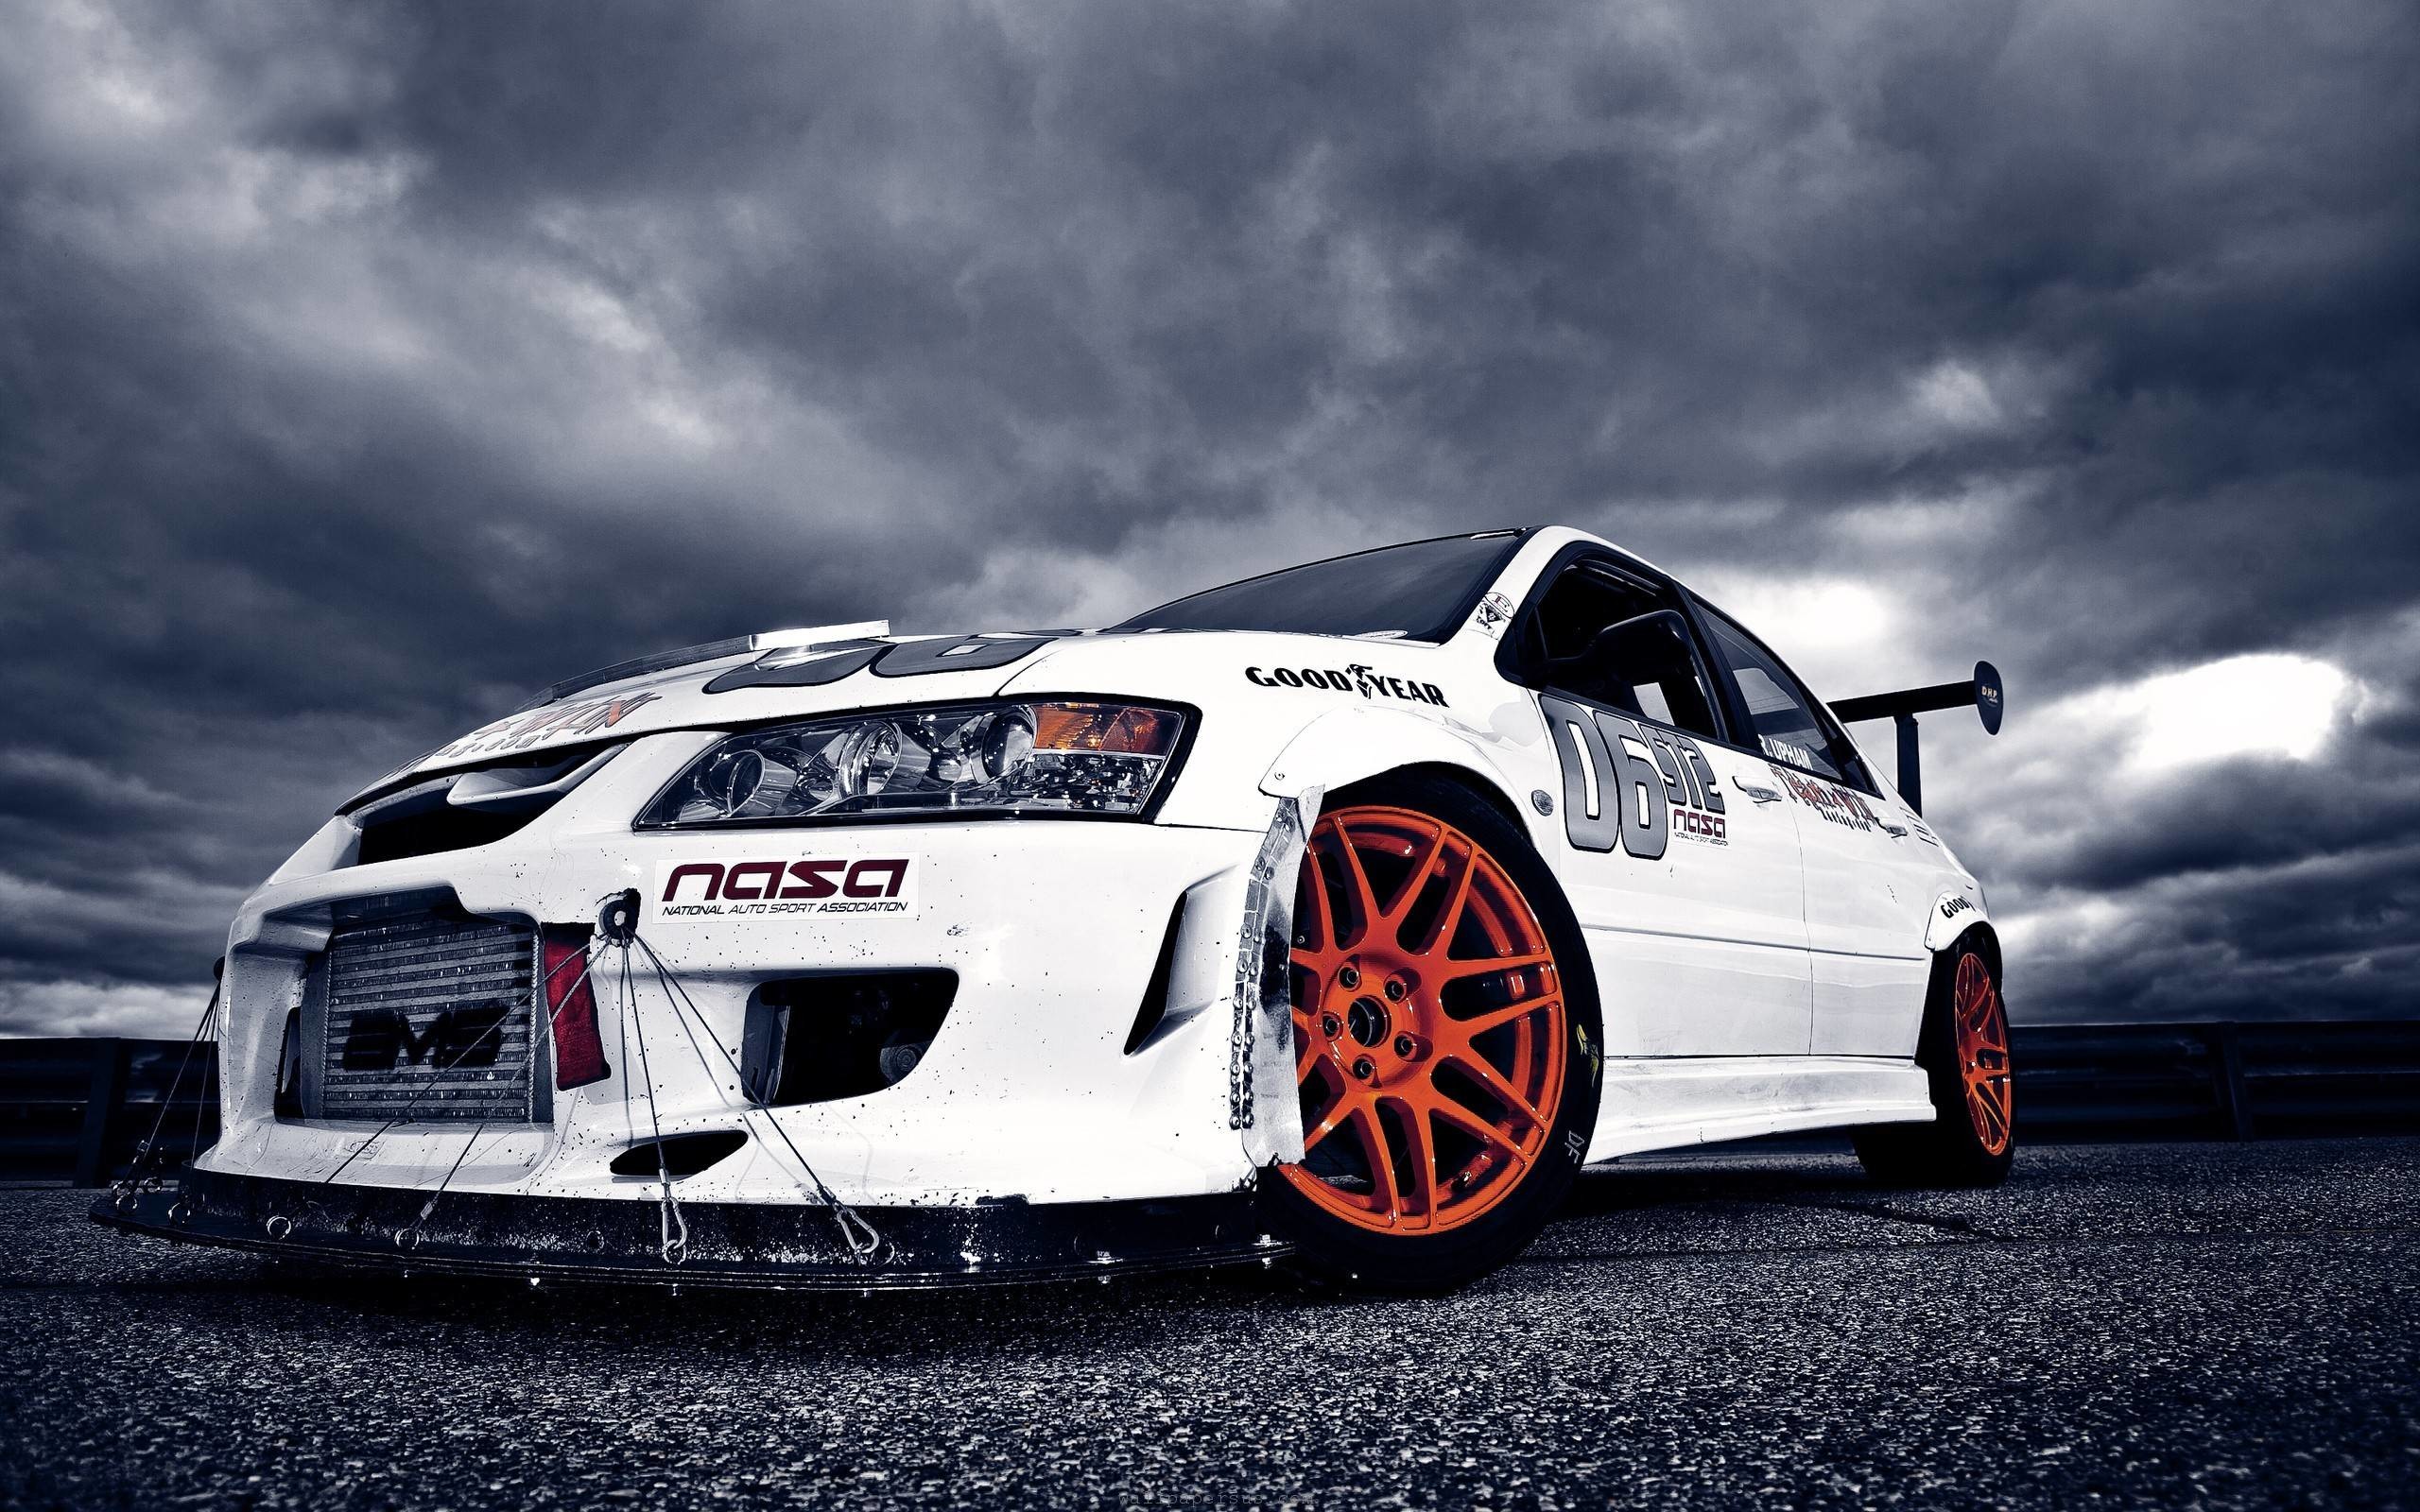 2560x1600 Related Pictures Mitsubishi Evo 8 Car High Definition Wallpapers .